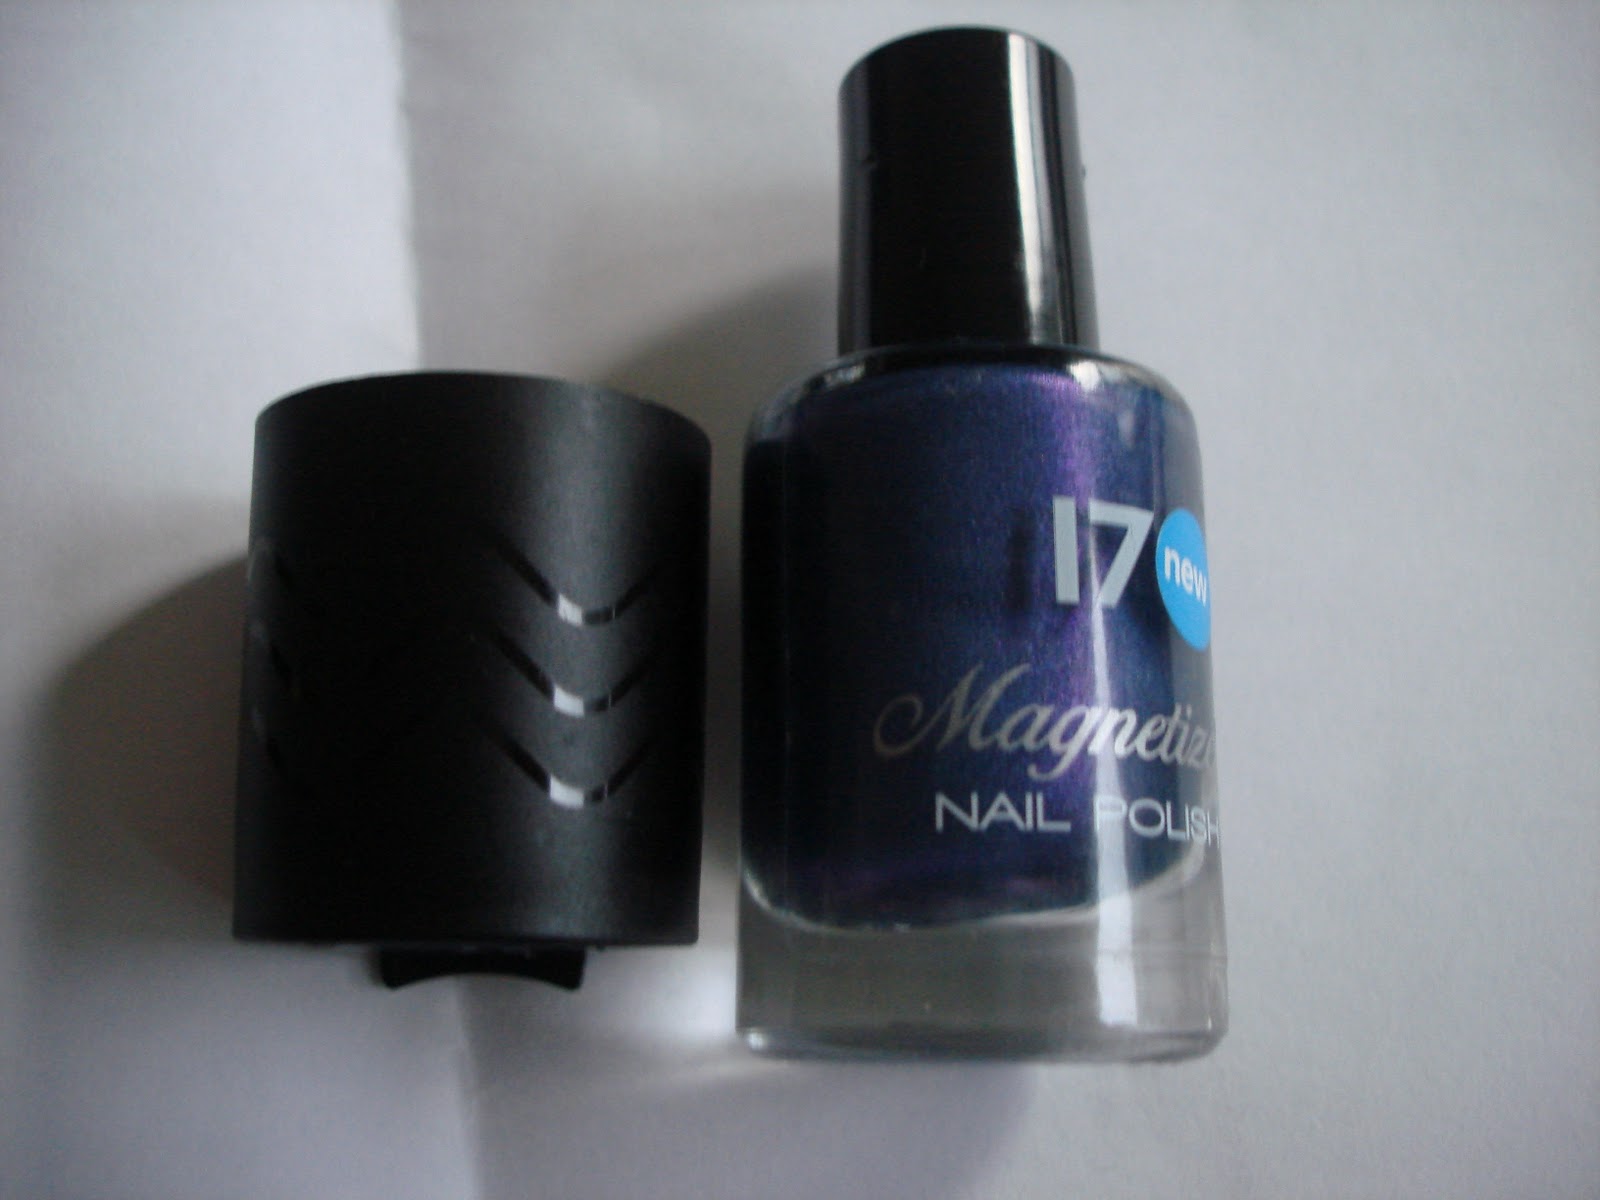 Acrylic Nail Designs with Magnetized Nail Polish - wide 6